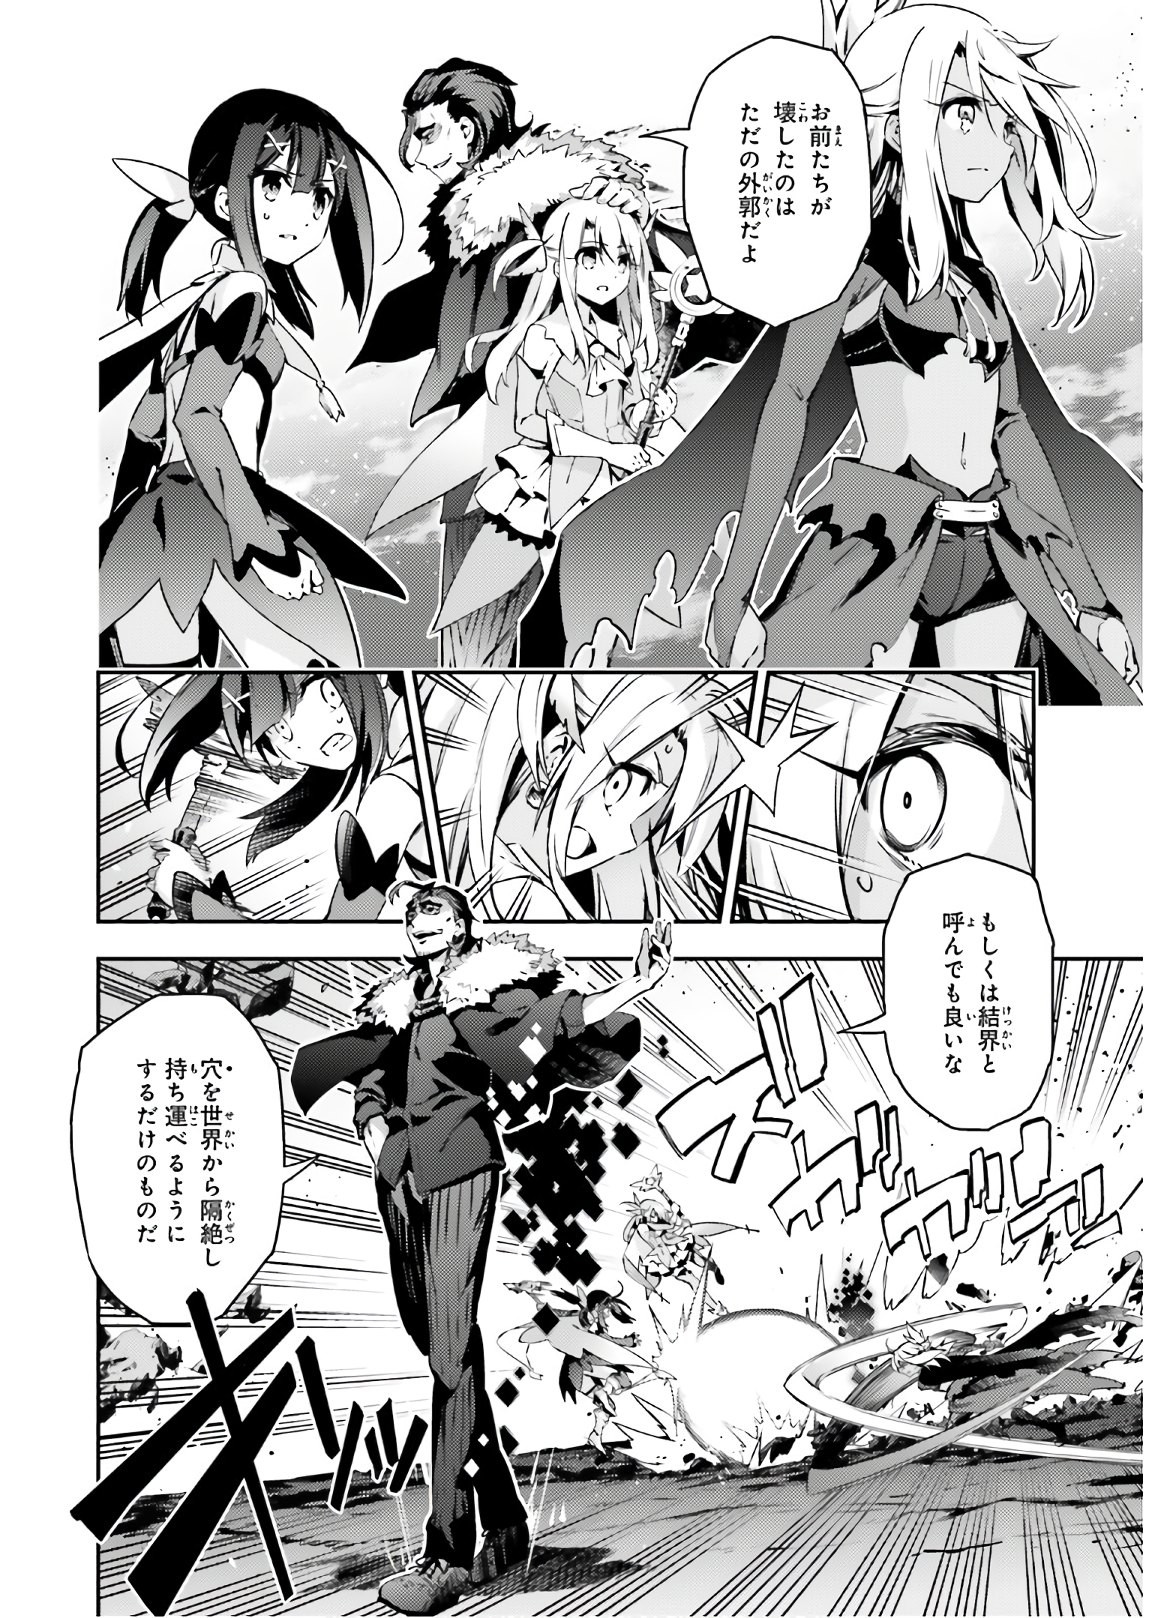 Fate/Kaleid Liner Prisma Illya Drei! - Chapter 58-1 - Page 4